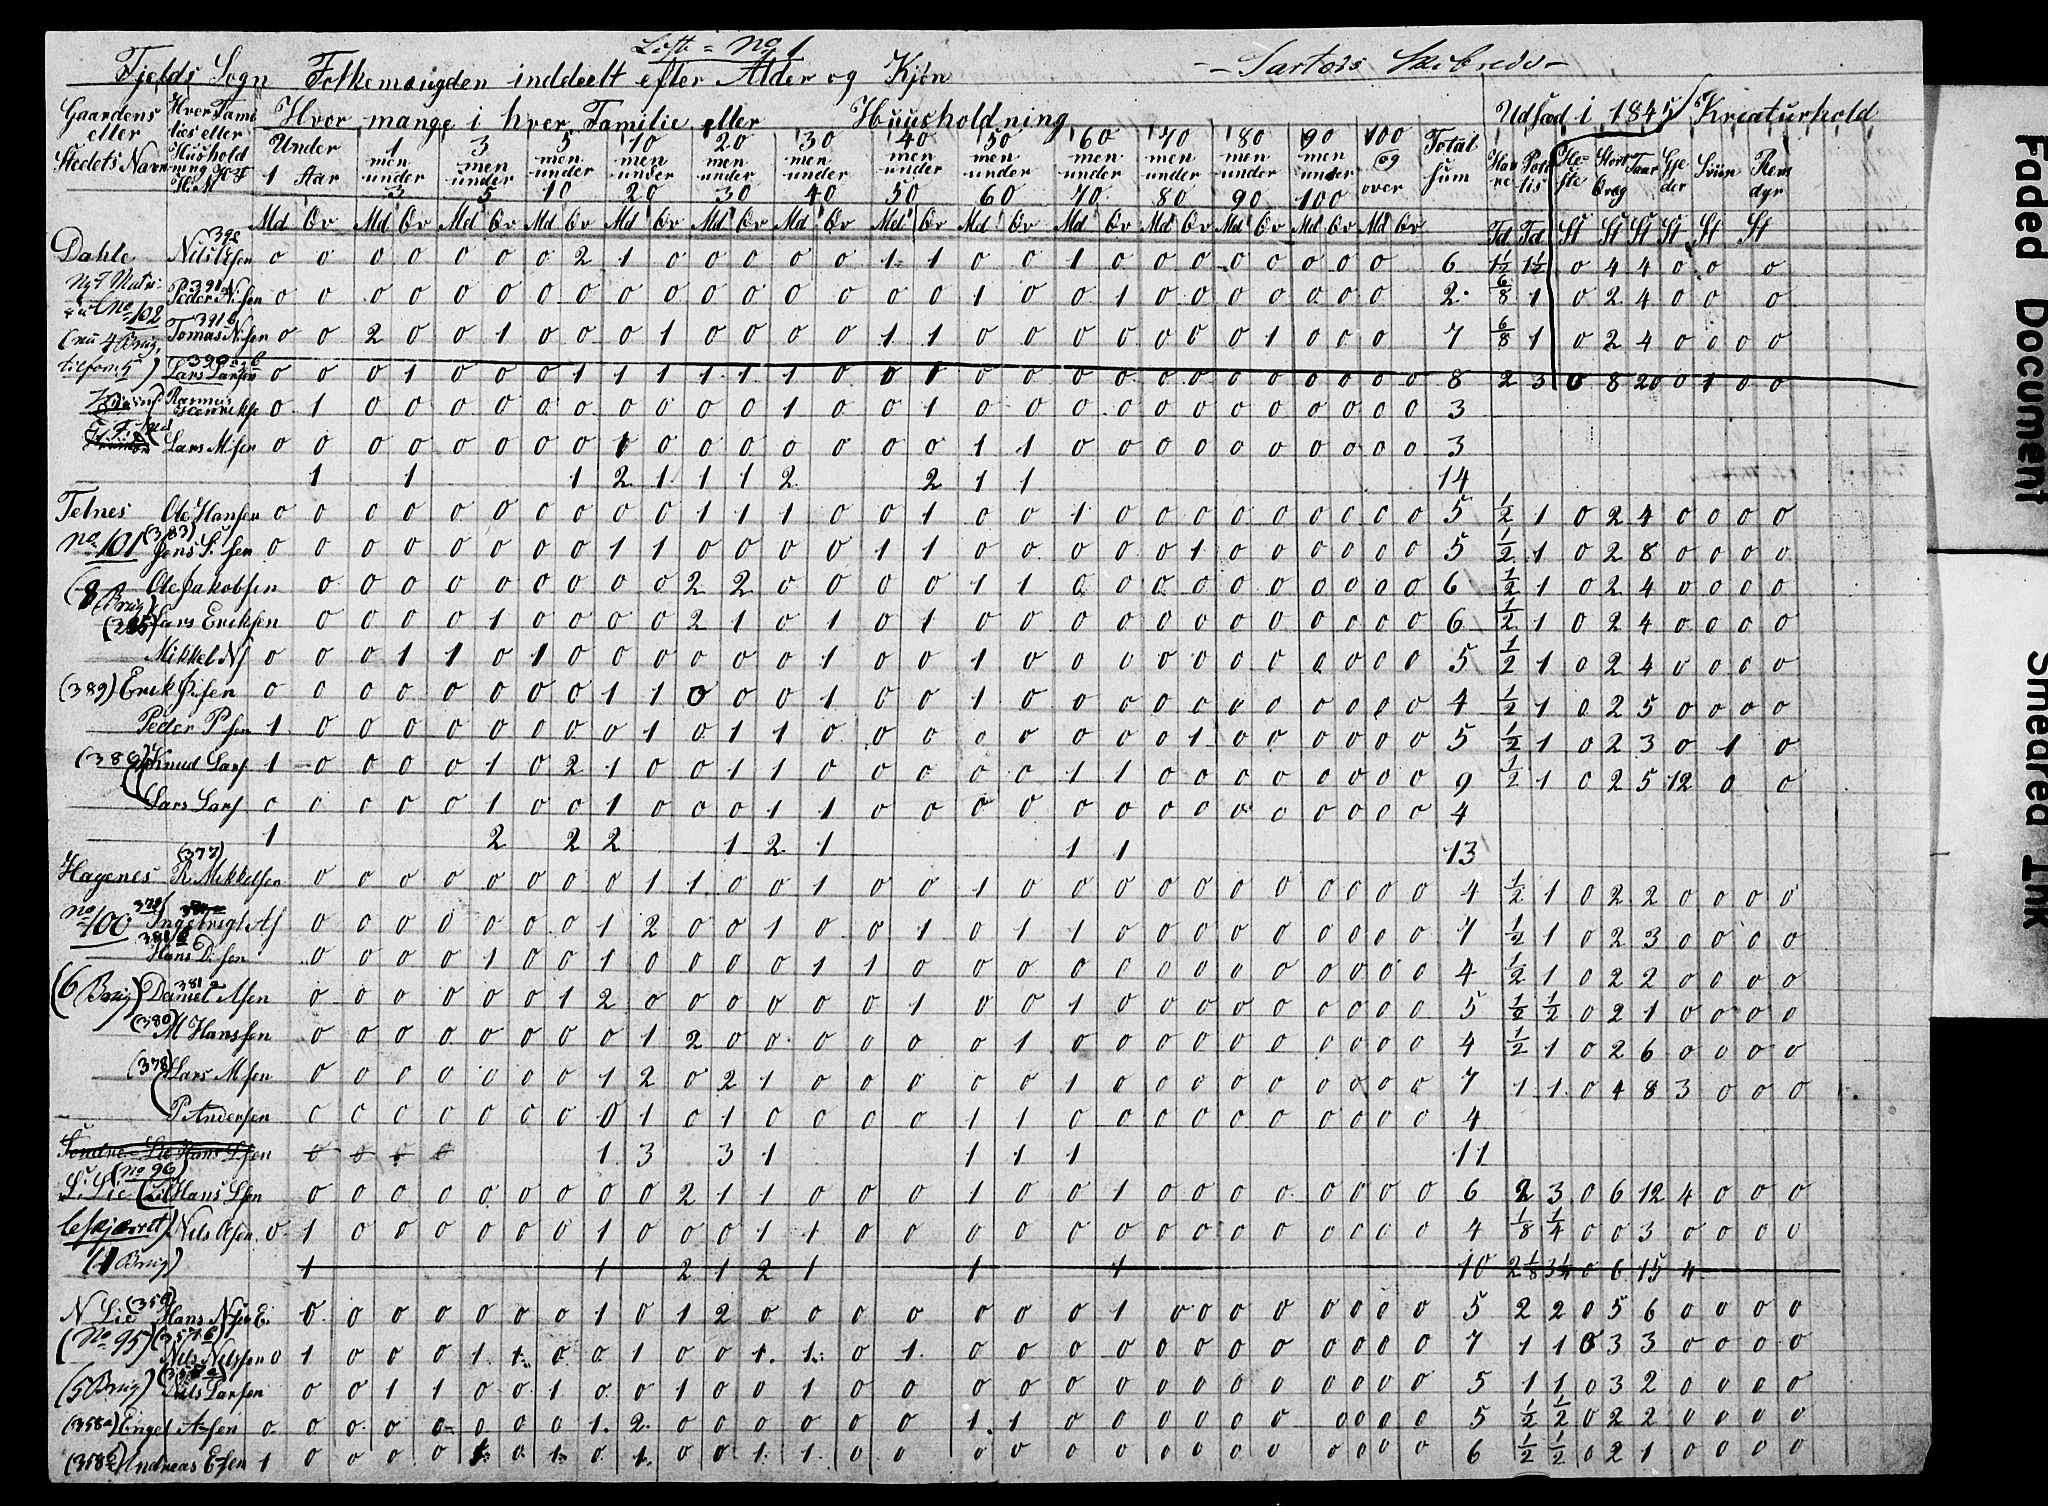 , Census 1845 for Fjell/Fjell, 1845, p. 3